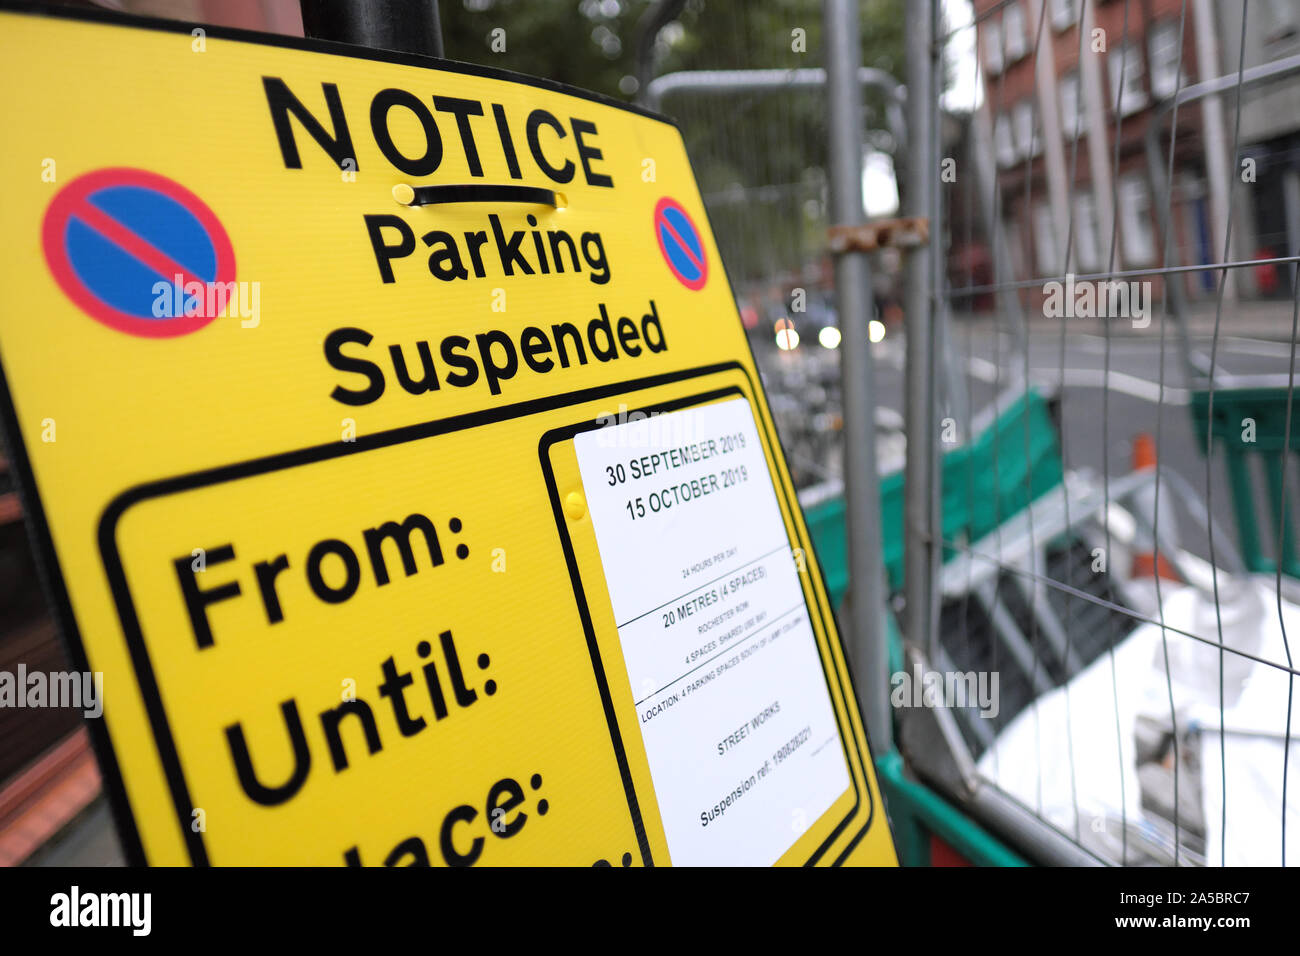 Parking bay suspended notice in central London 2019 Stock Photo